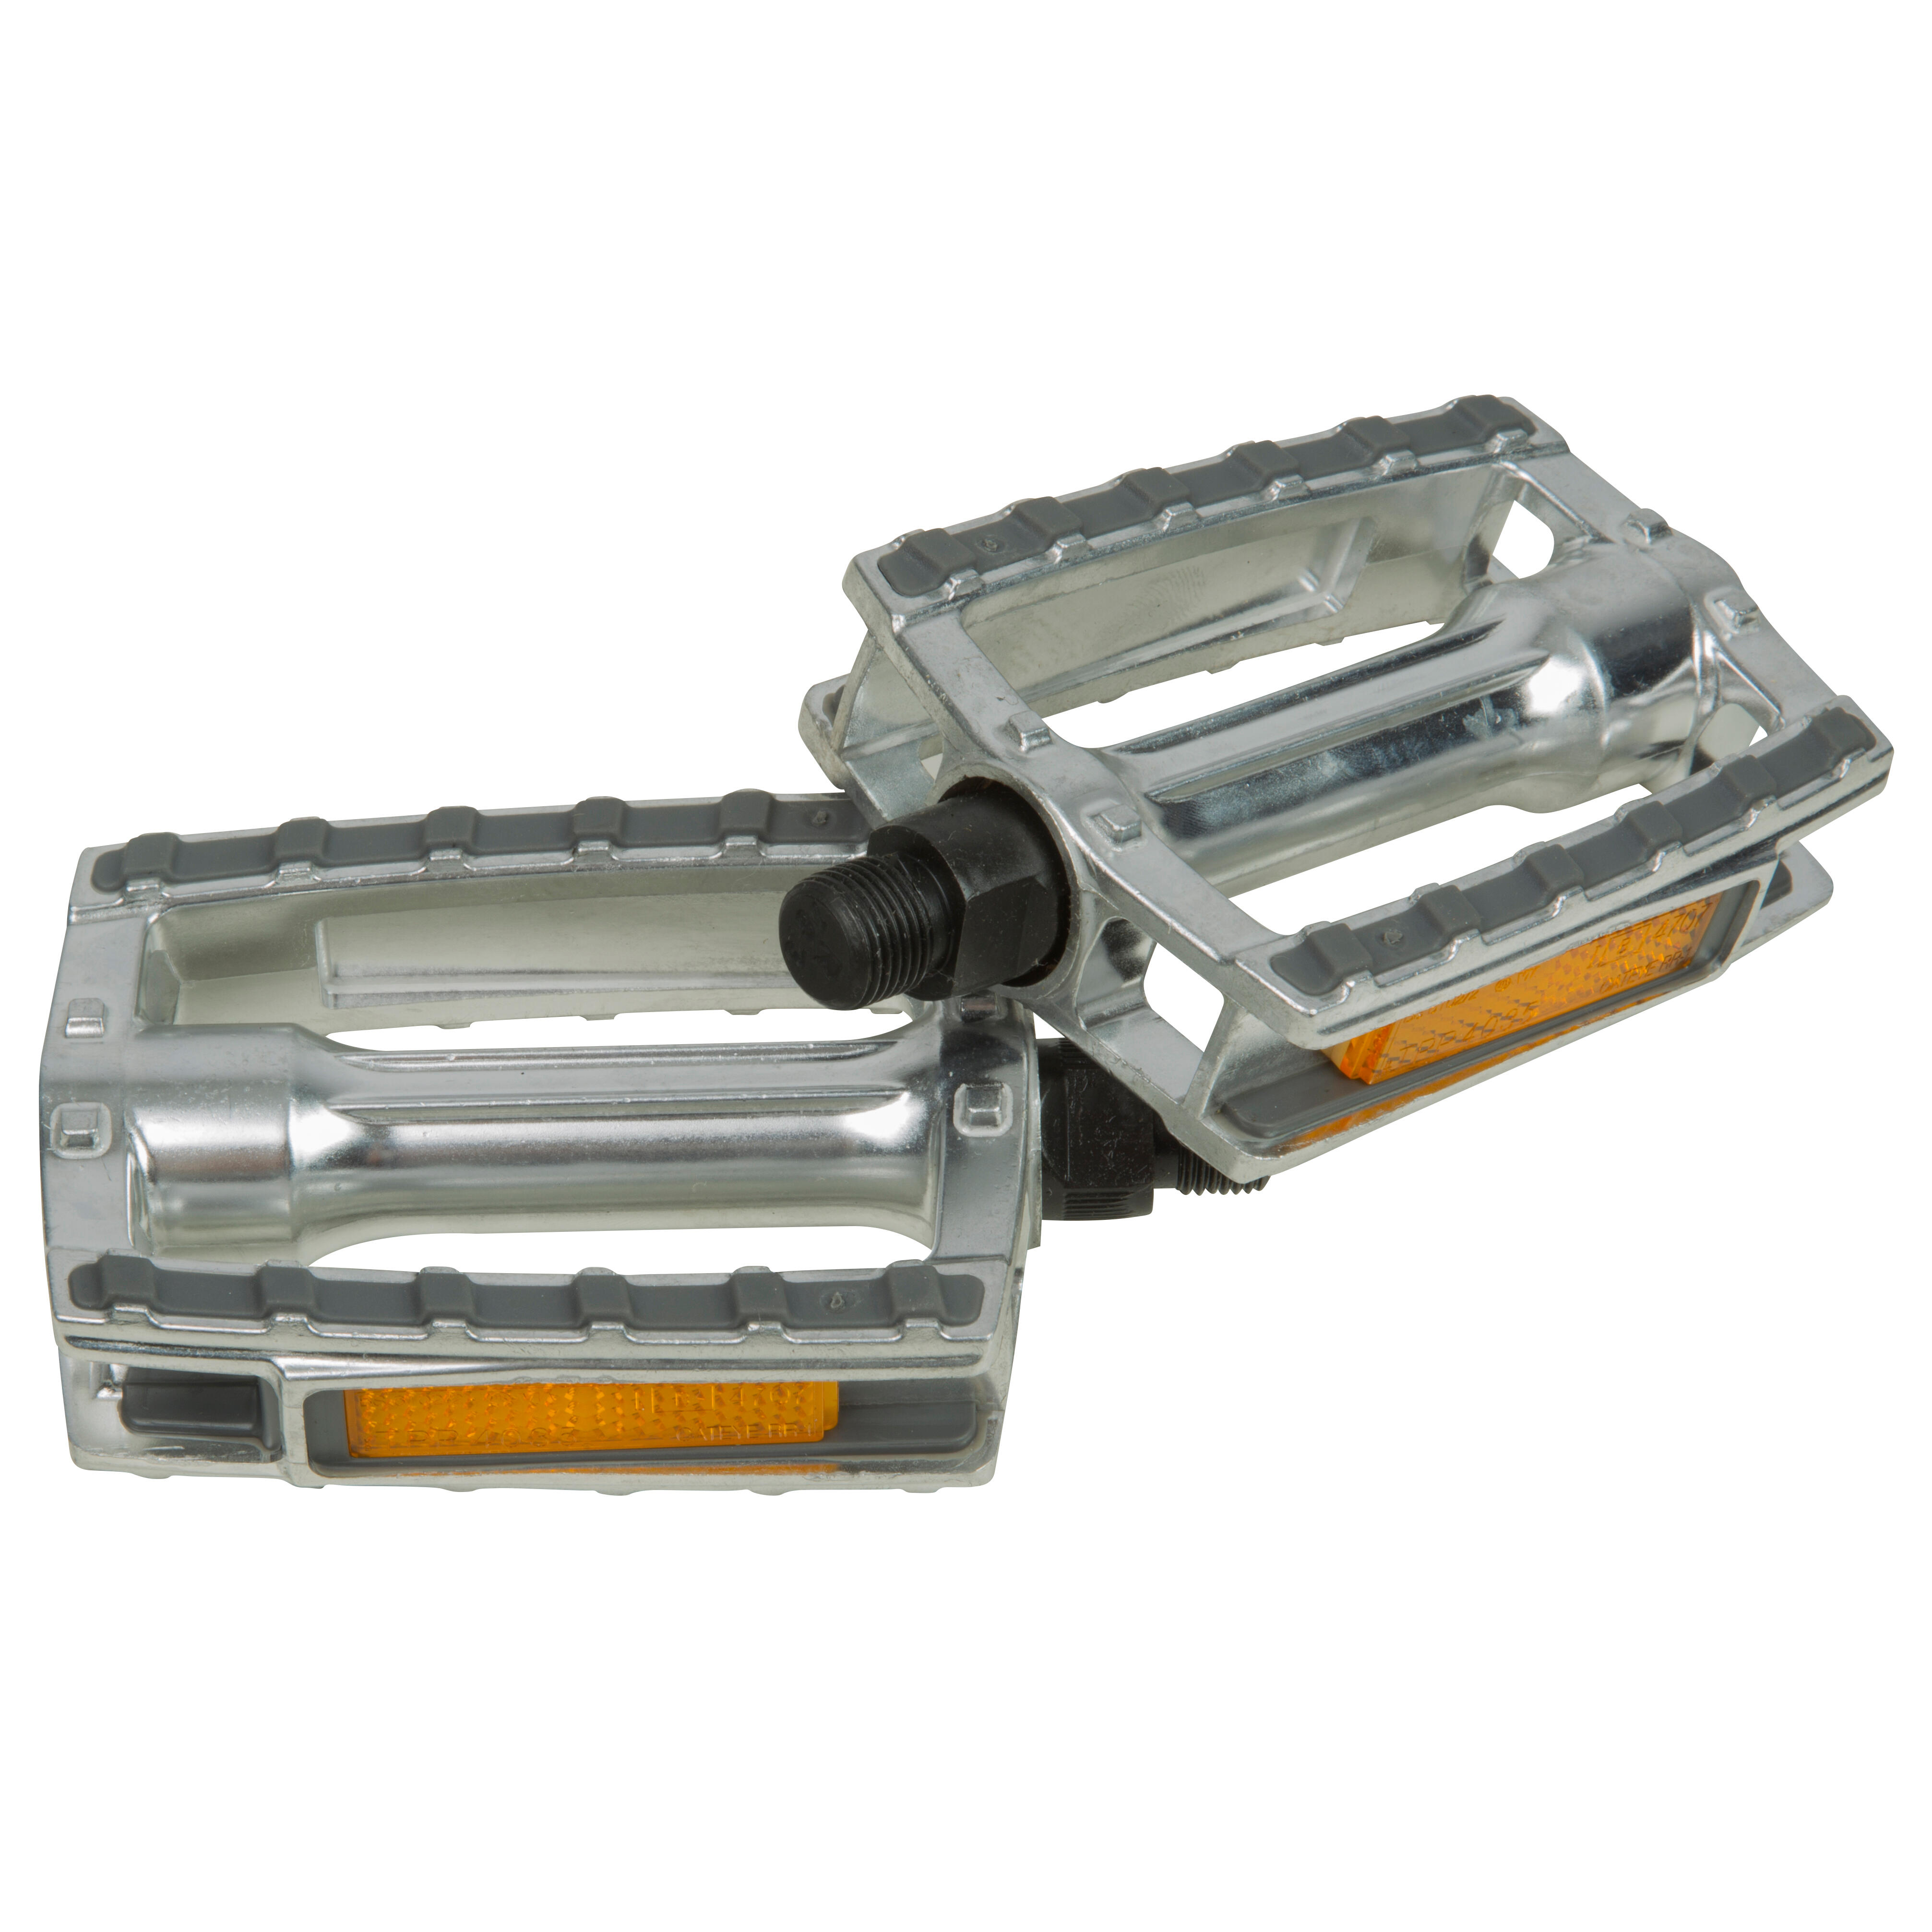 Aluminum City Cycling Pedals - 500 Grip - BTWIN